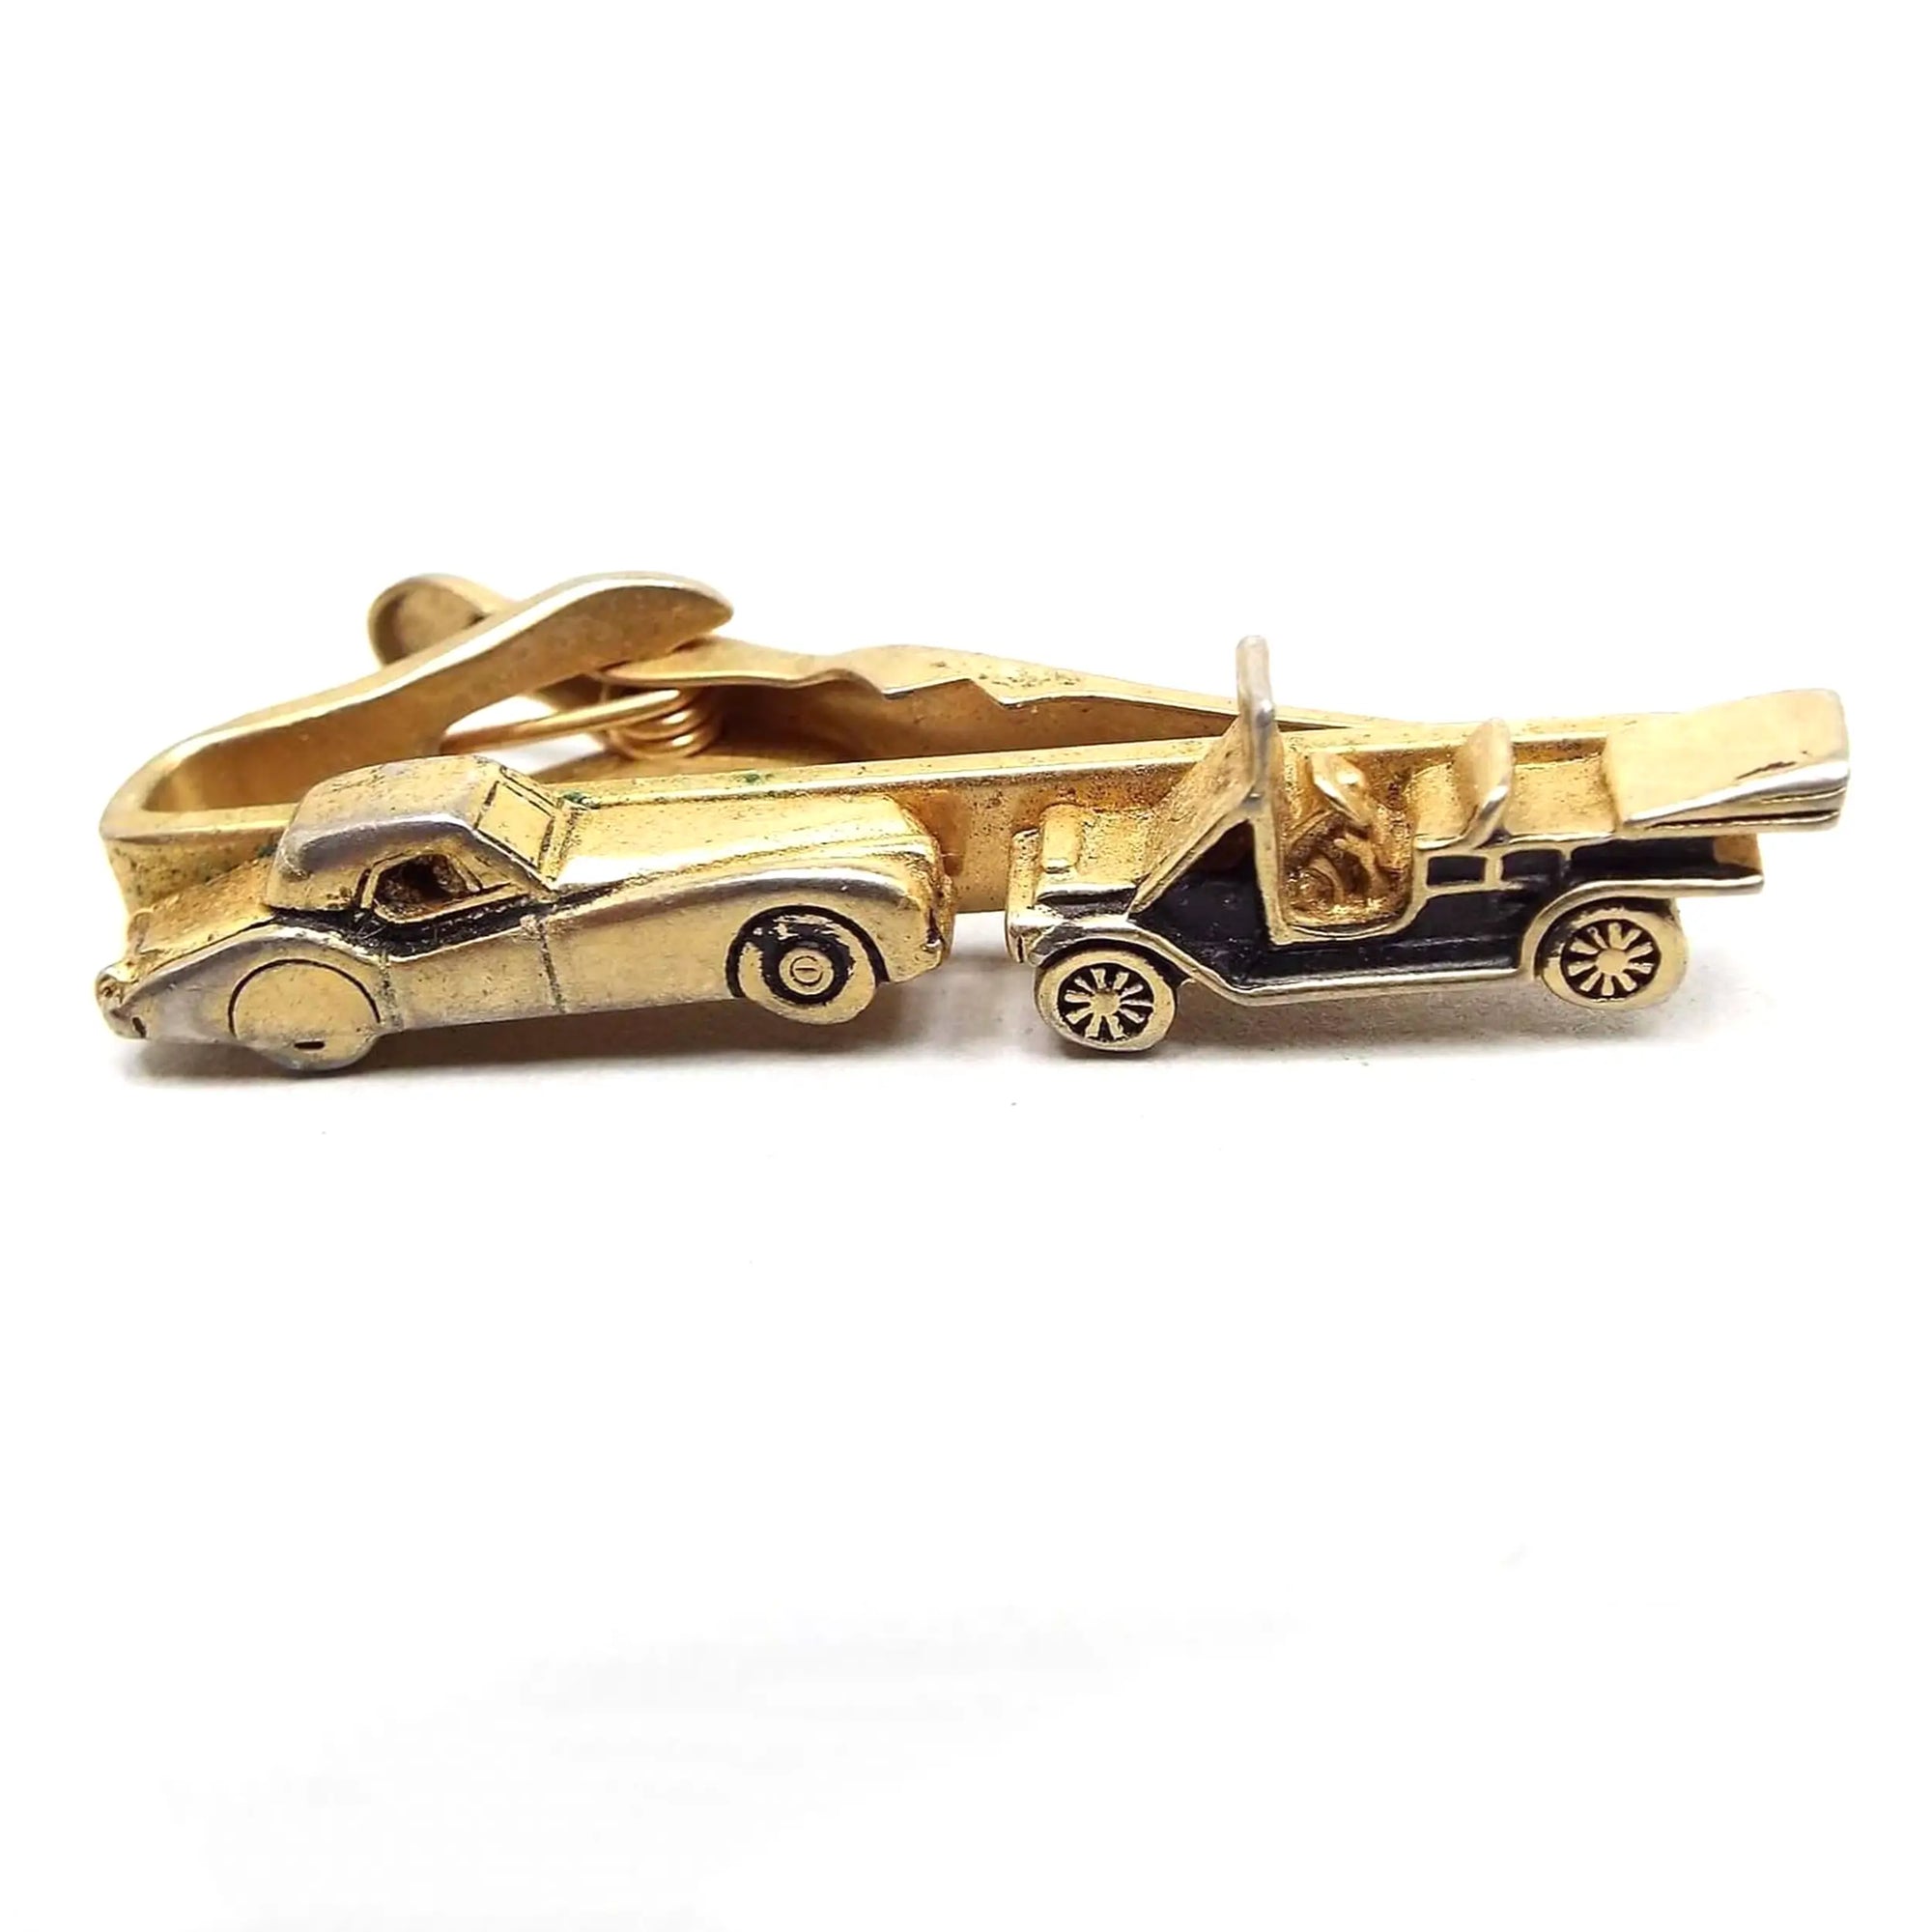 Angled front view of the retro vintage Swank car tie clip. The metal is gold tone in color. The front bar has a 3D style vintage car on the left and an antique style car on the right with a black painted body. The alligator style clip is showing on the back.